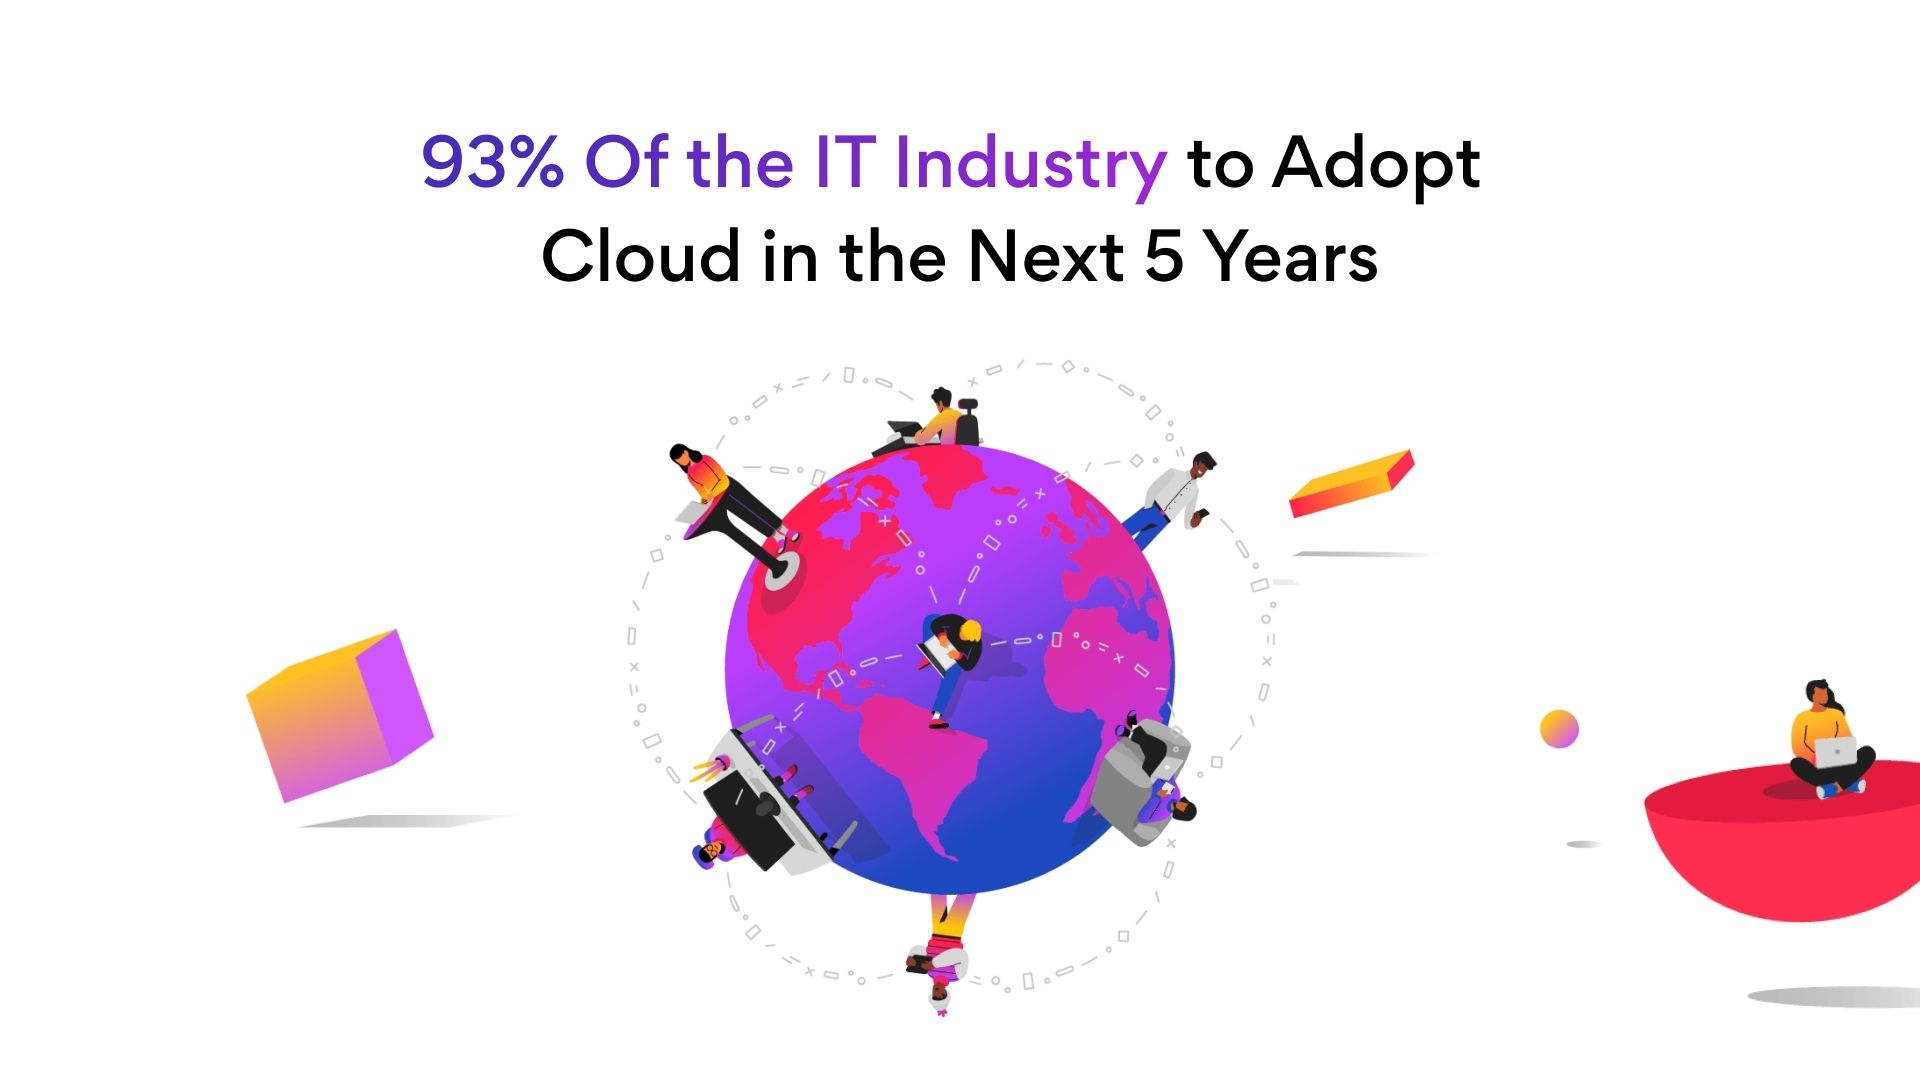 93% Of the IT Industry to Adopt Cloud Tech in the Next 5 Years